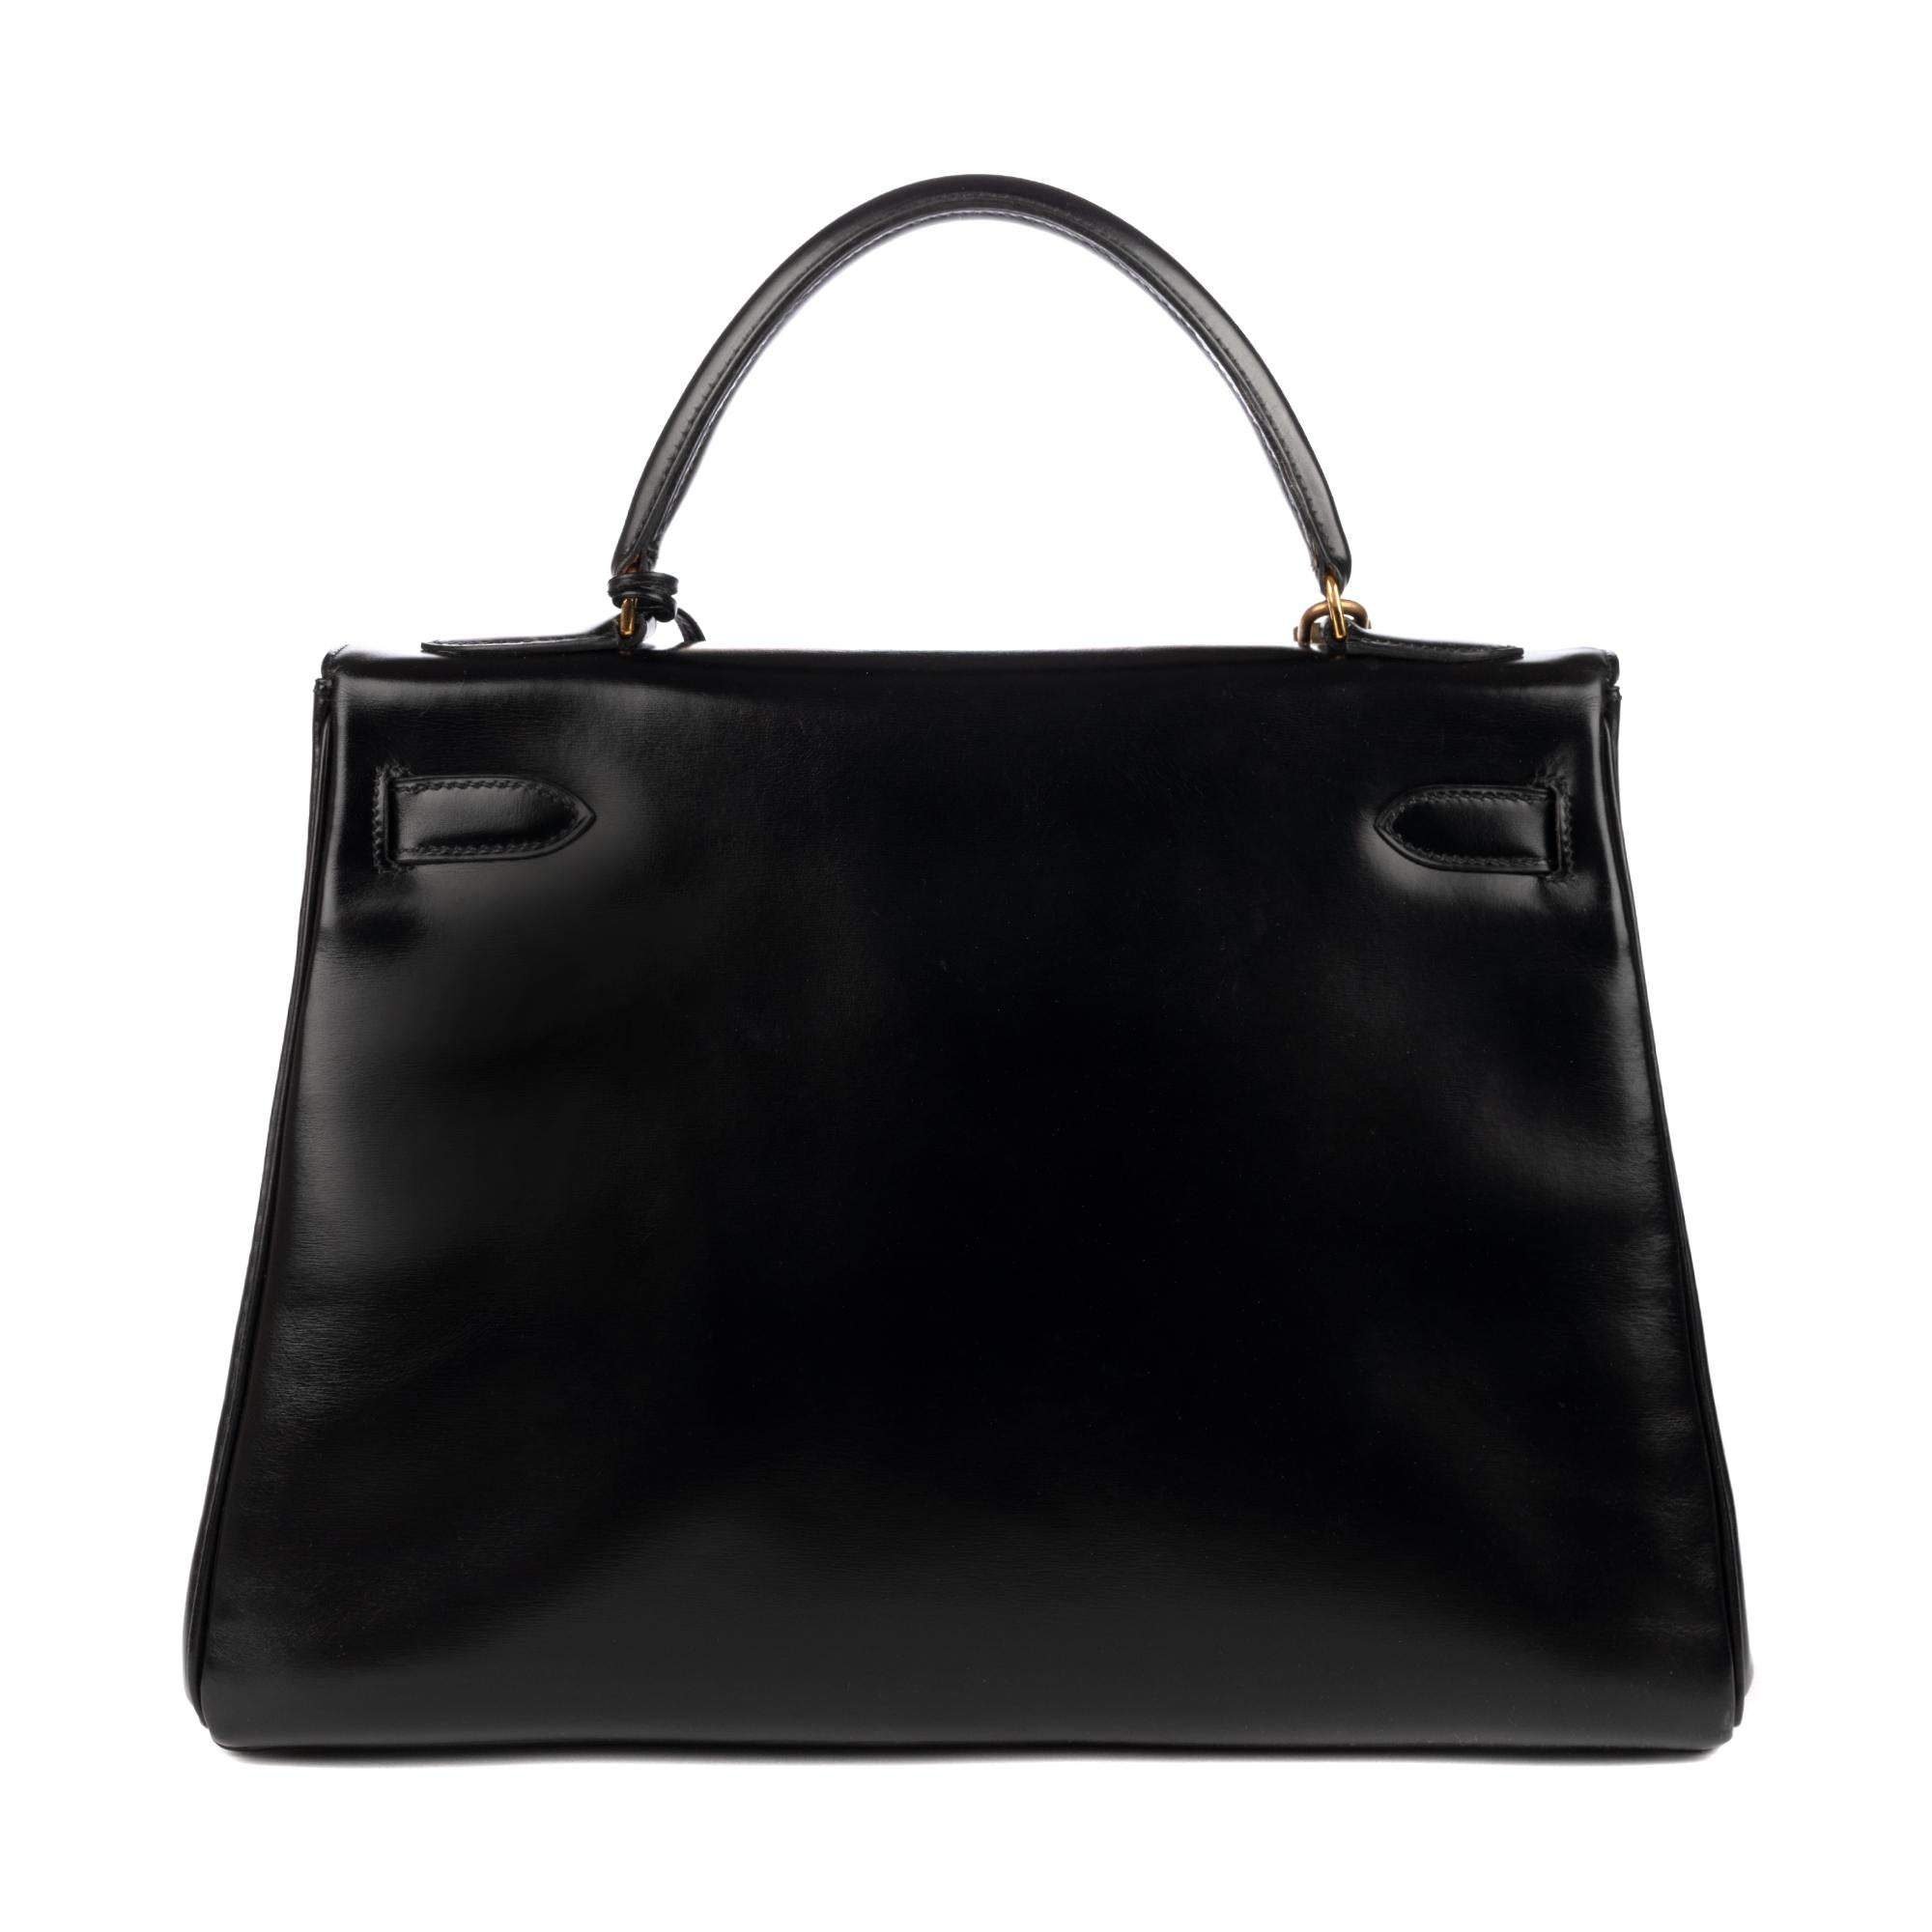 The Hermes Kelly back 32 cm
 bag in black box leather, gold metal hardware
, single handle in black leather, removable shoulder strap new (not signed Hermes) in black leather for hand or shoulder worn.  Flap closure.  Inner lining in black leather,